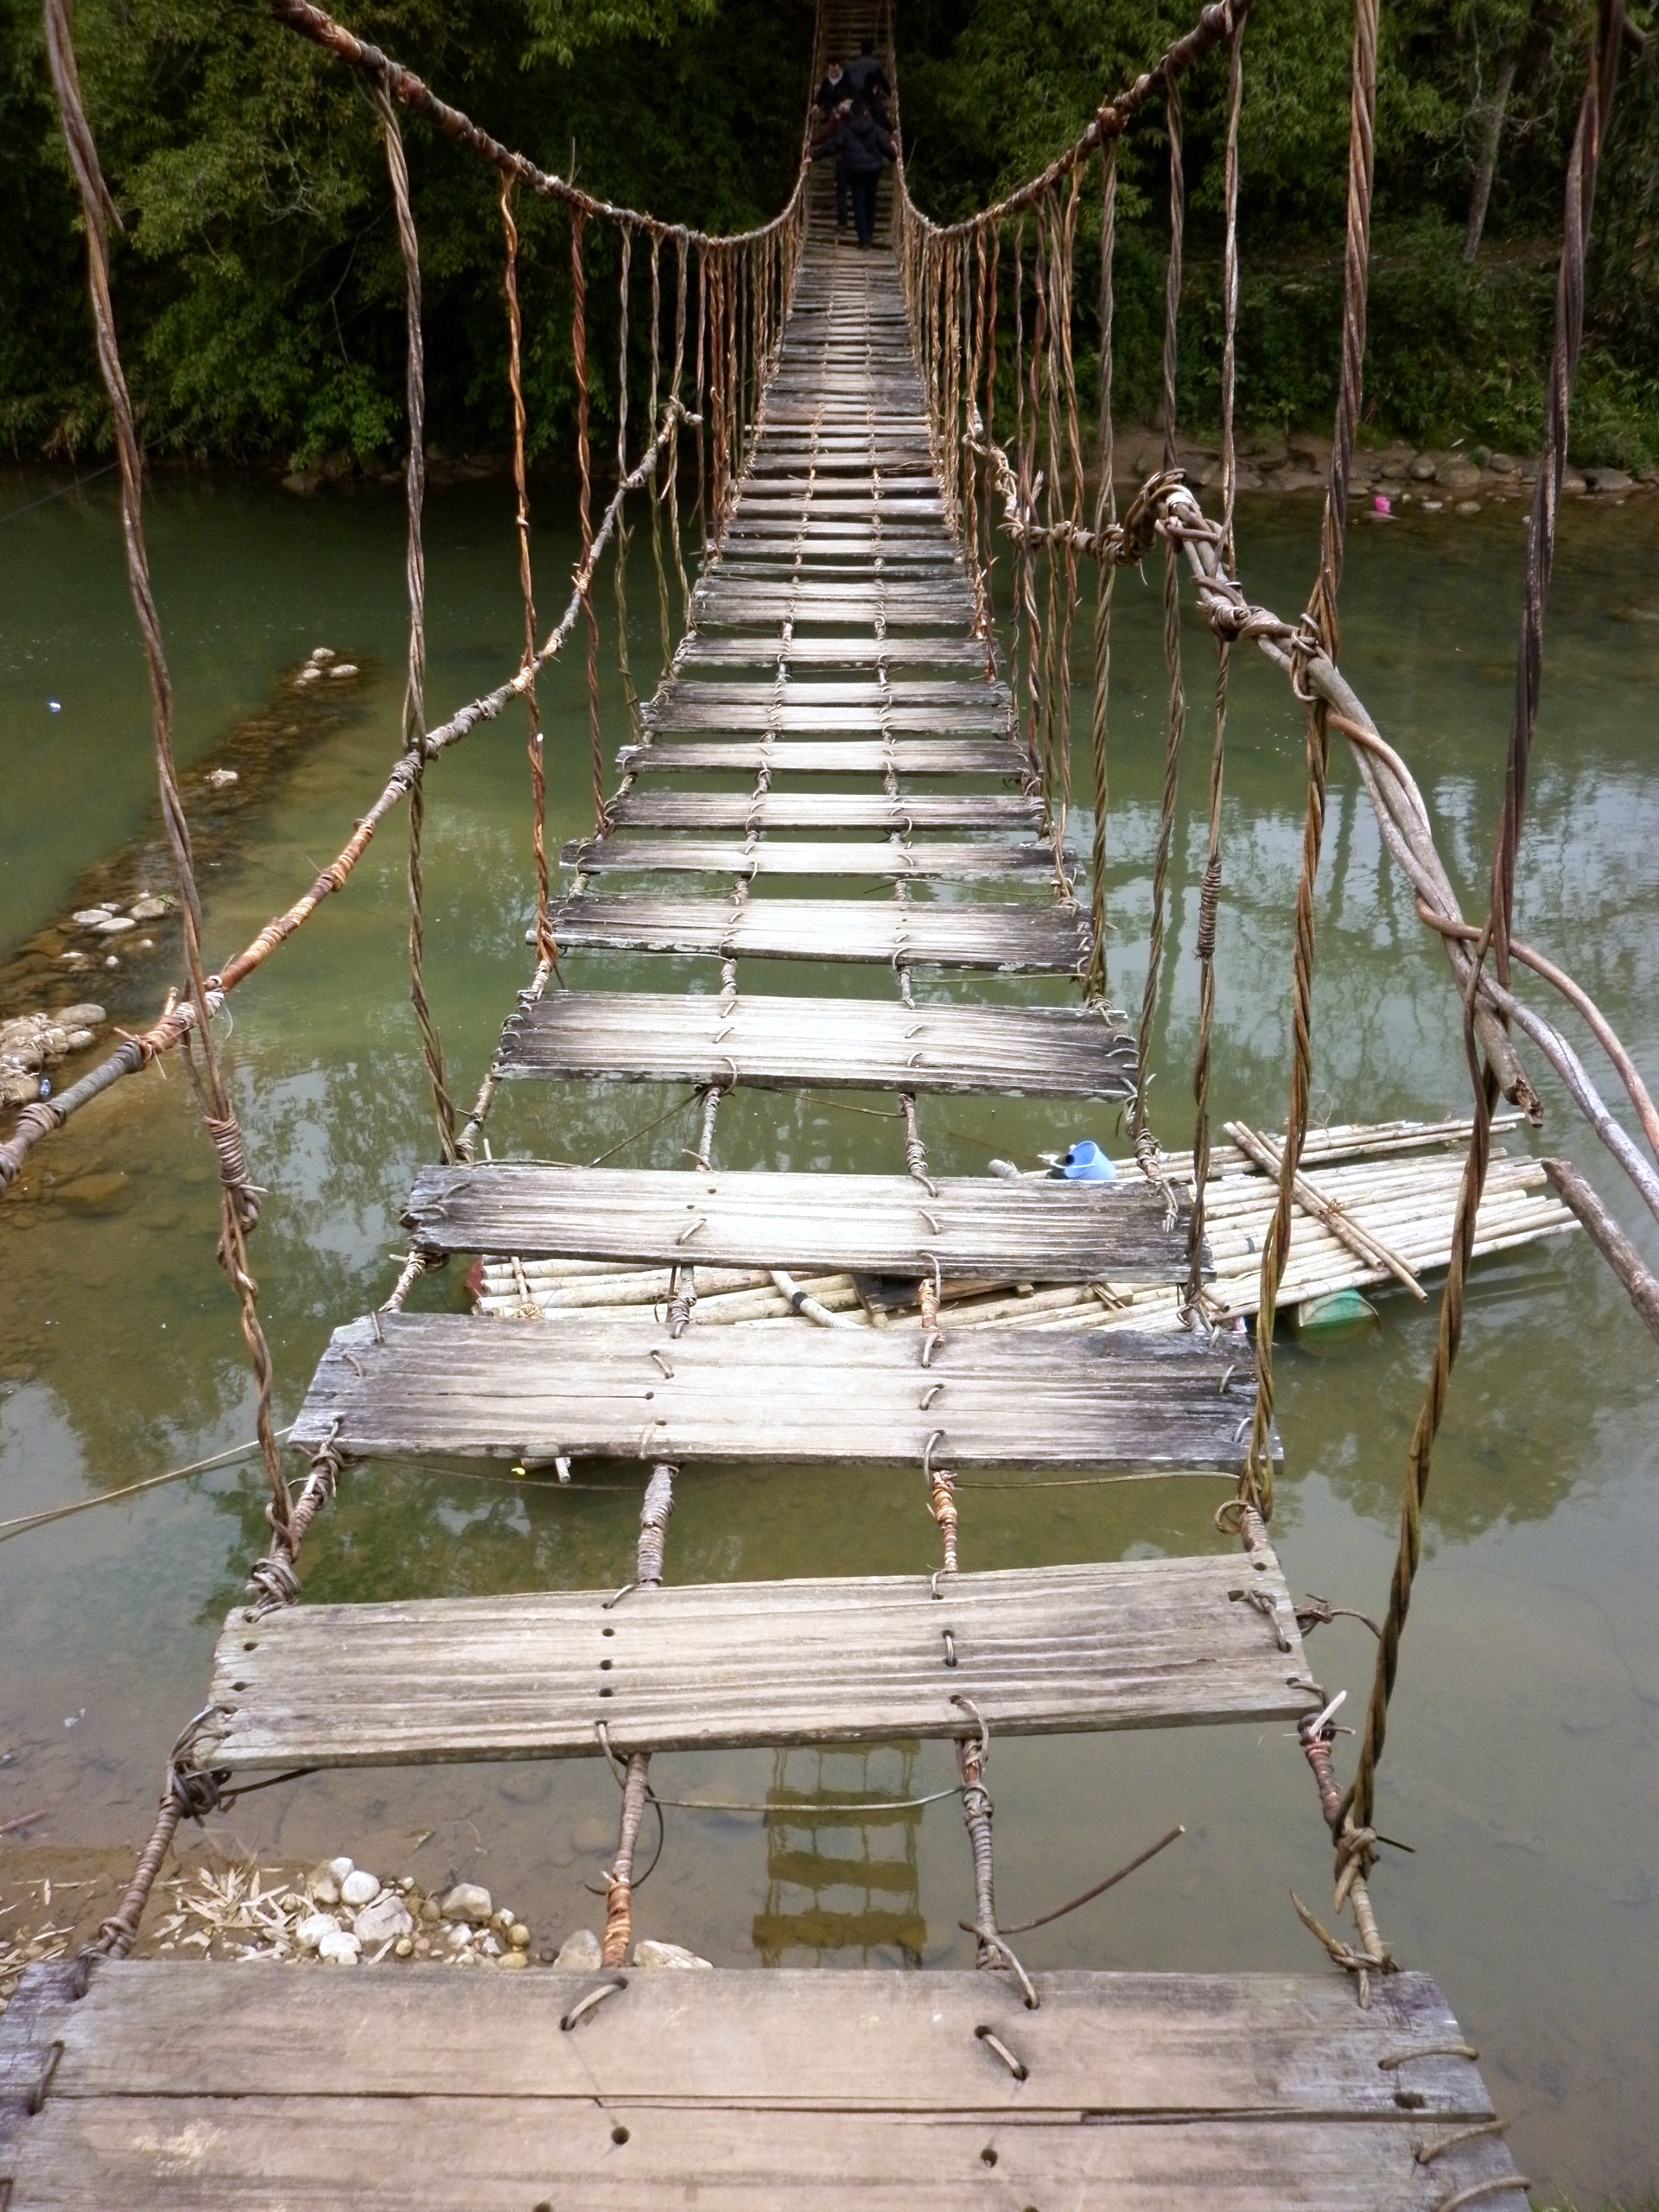 A rickety old bridge over the Muong Hoa River in Ta Van in Lao Cai province in Northern Vietnam.